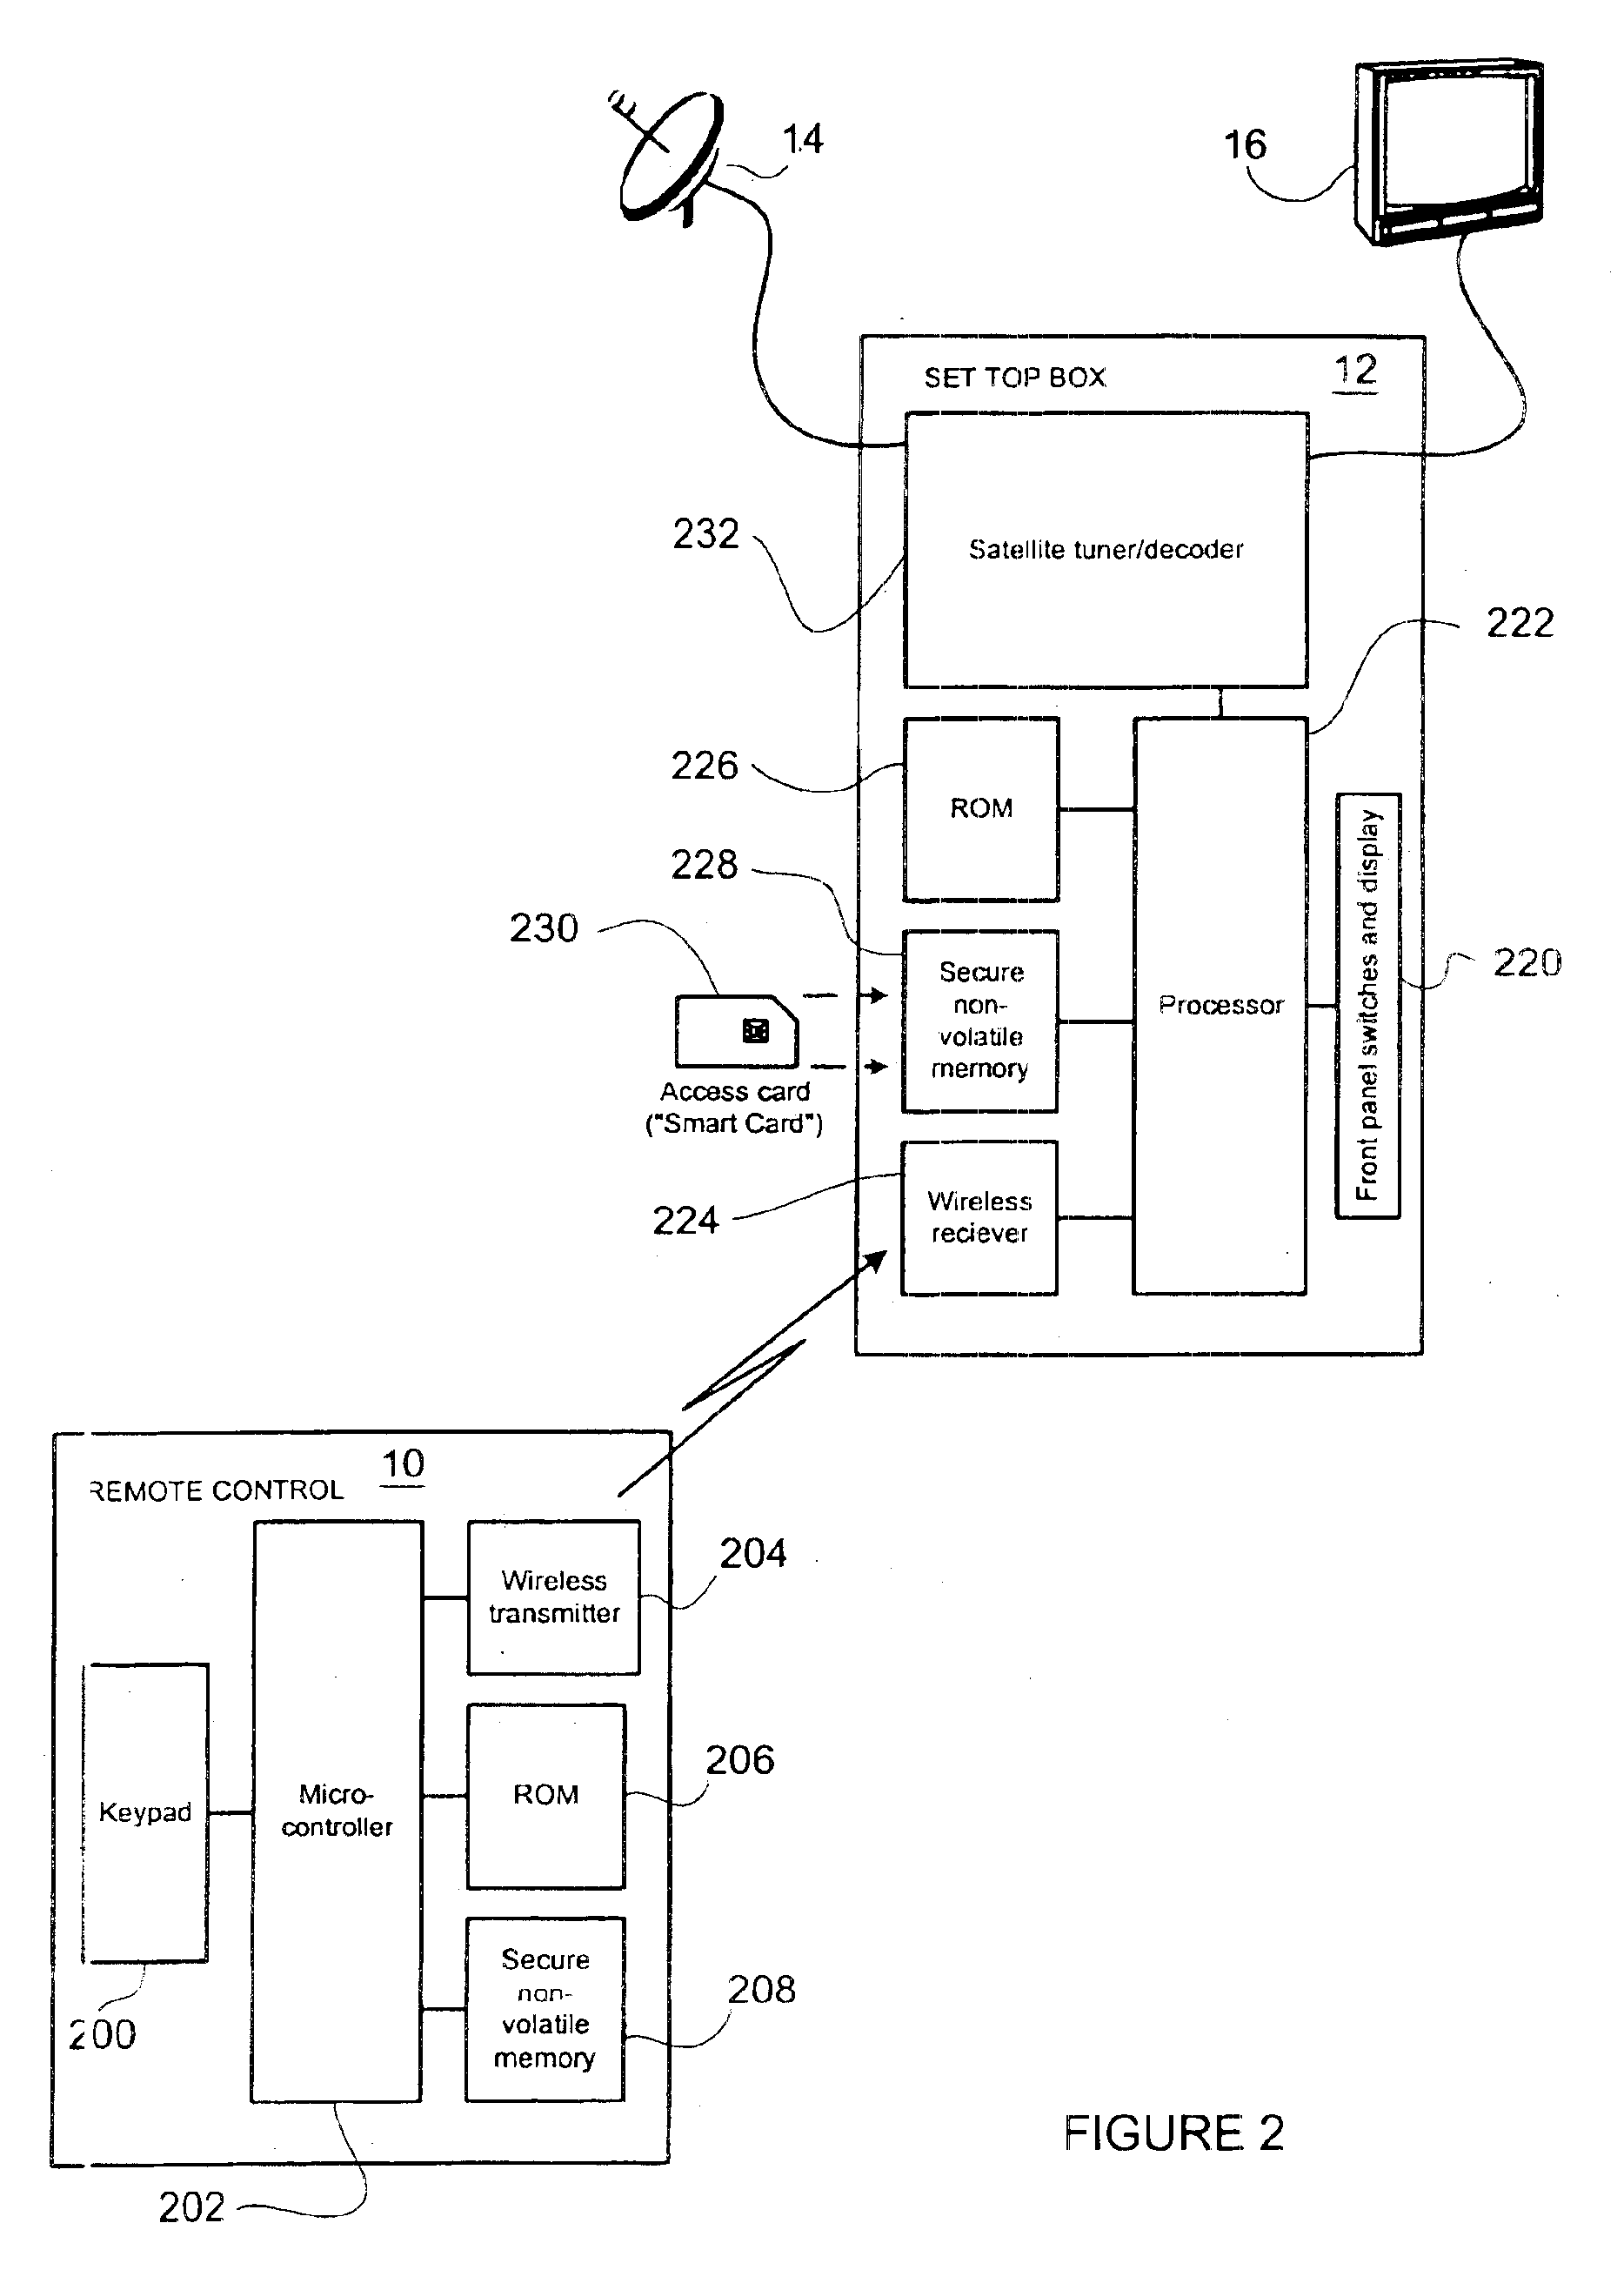 System and method for limiting access to data